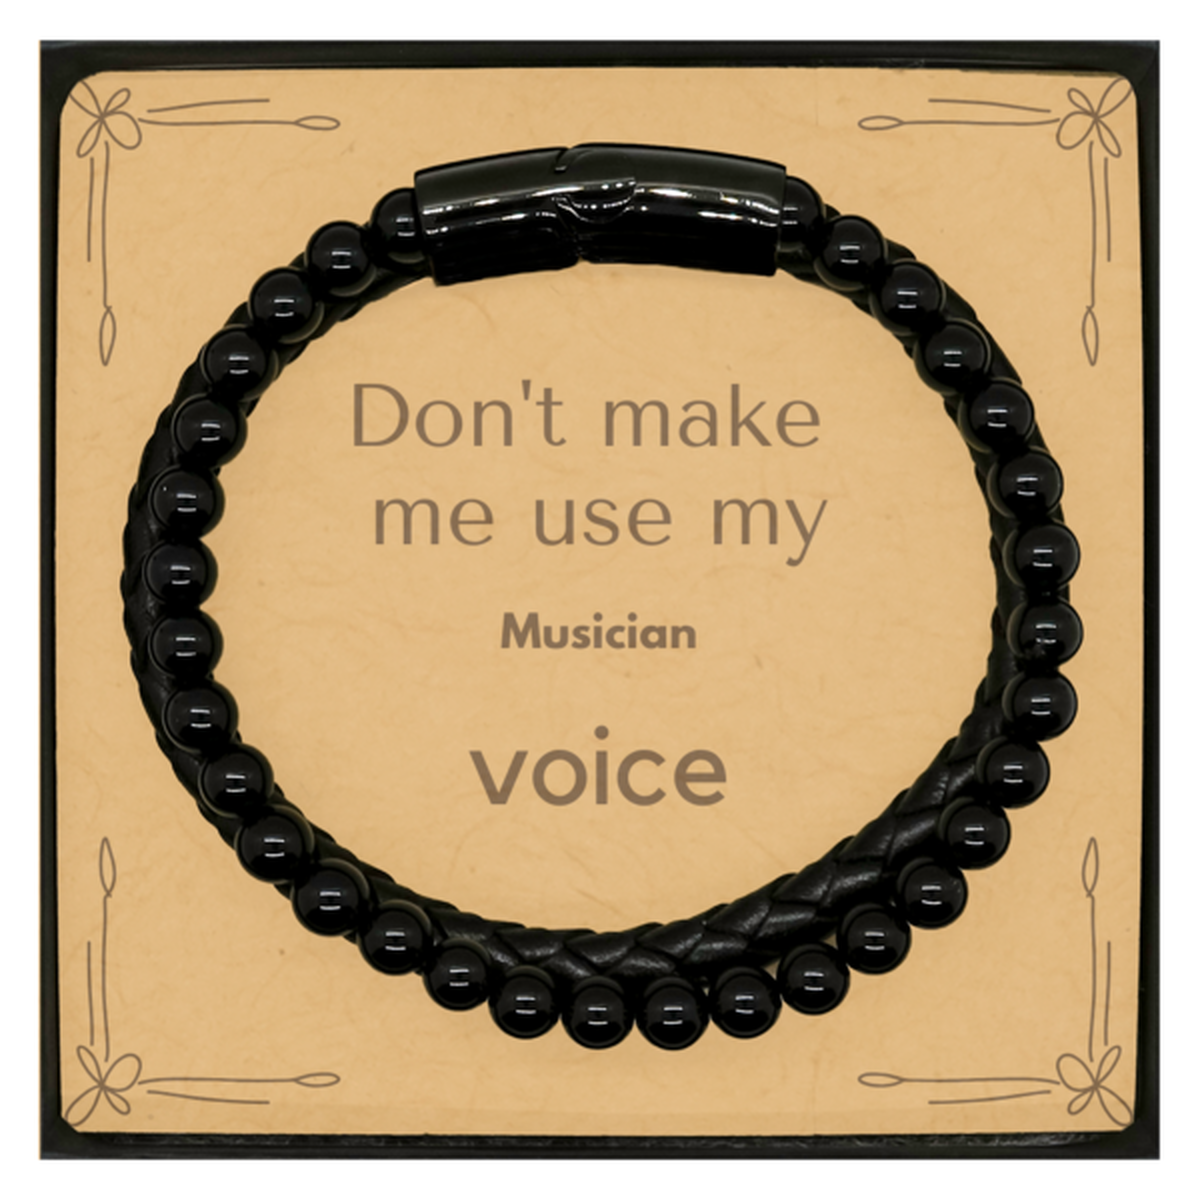 Don't make me use my Musician voice, Sarcasm Musician Card Gifts, Christmas Musician Stone Leather Bracelets Birthday Unique Gifts For Musician Coworkers, Men, Women, Colleague, Friends